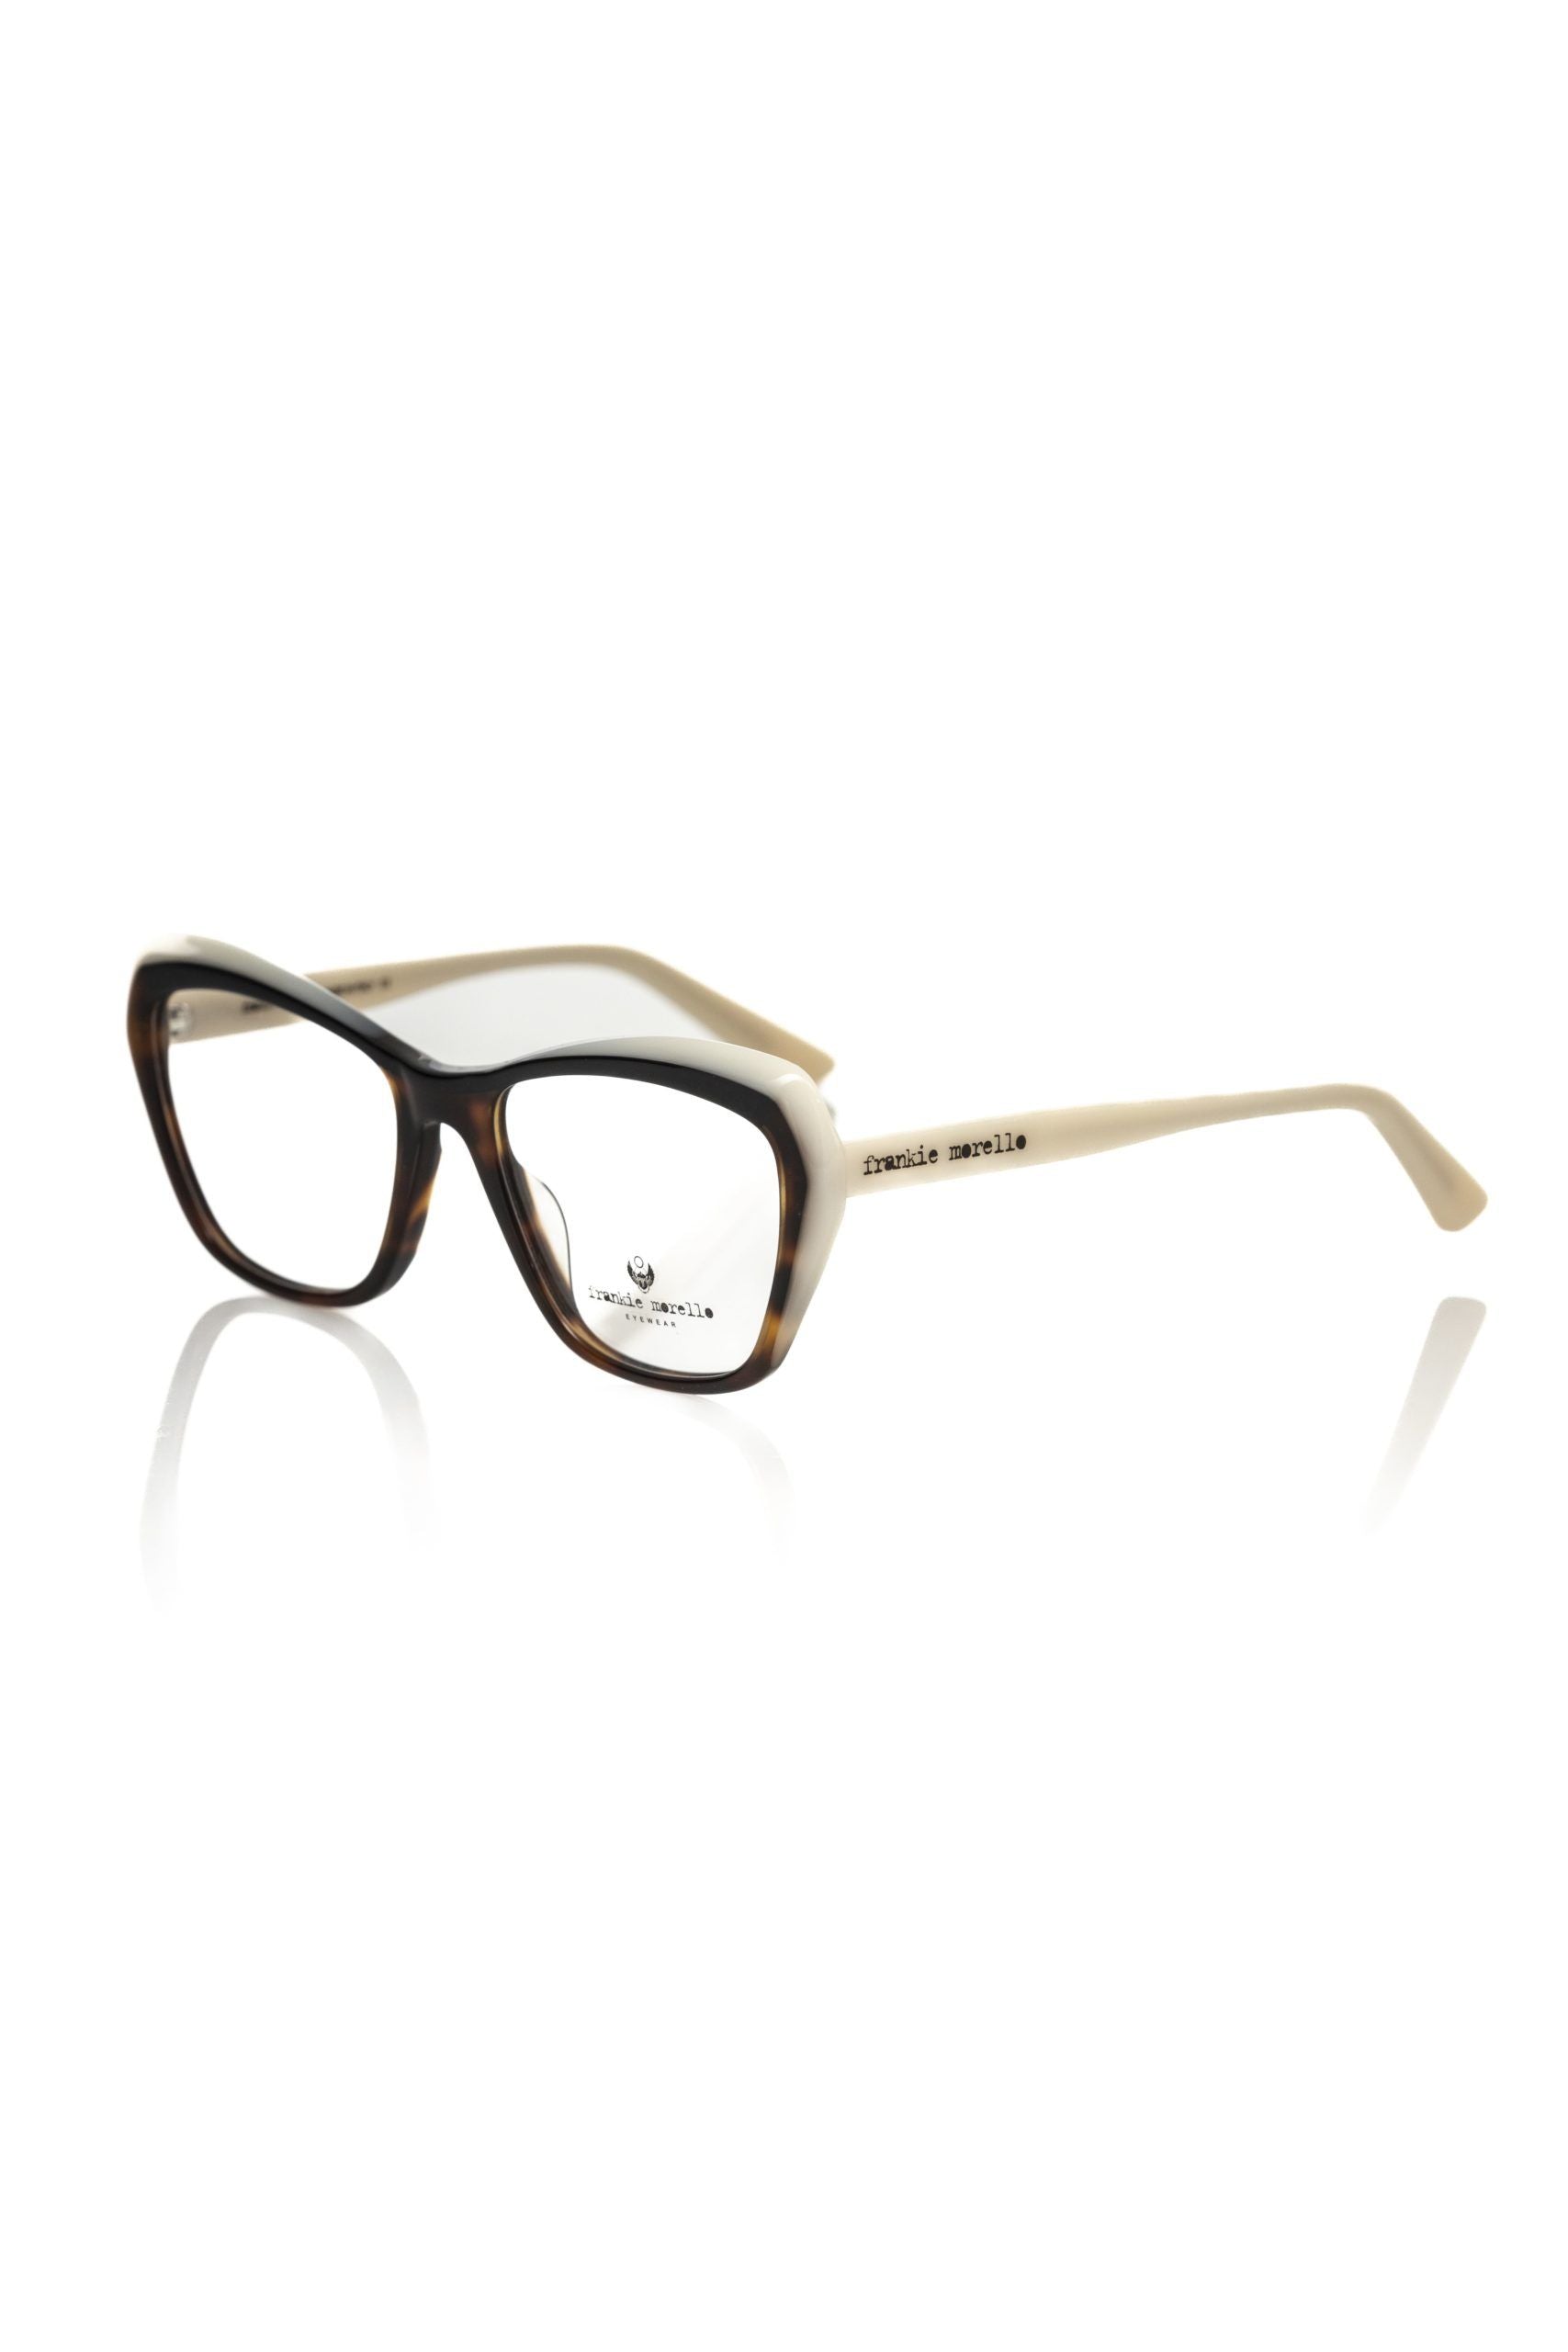 Frankie Morello FRMO-22108 Multicolor Acetate Frames - Designed by Frankie Morello Available to Buy at a Discounted Price on Moon Behind The Hill Online Designer Discount Store